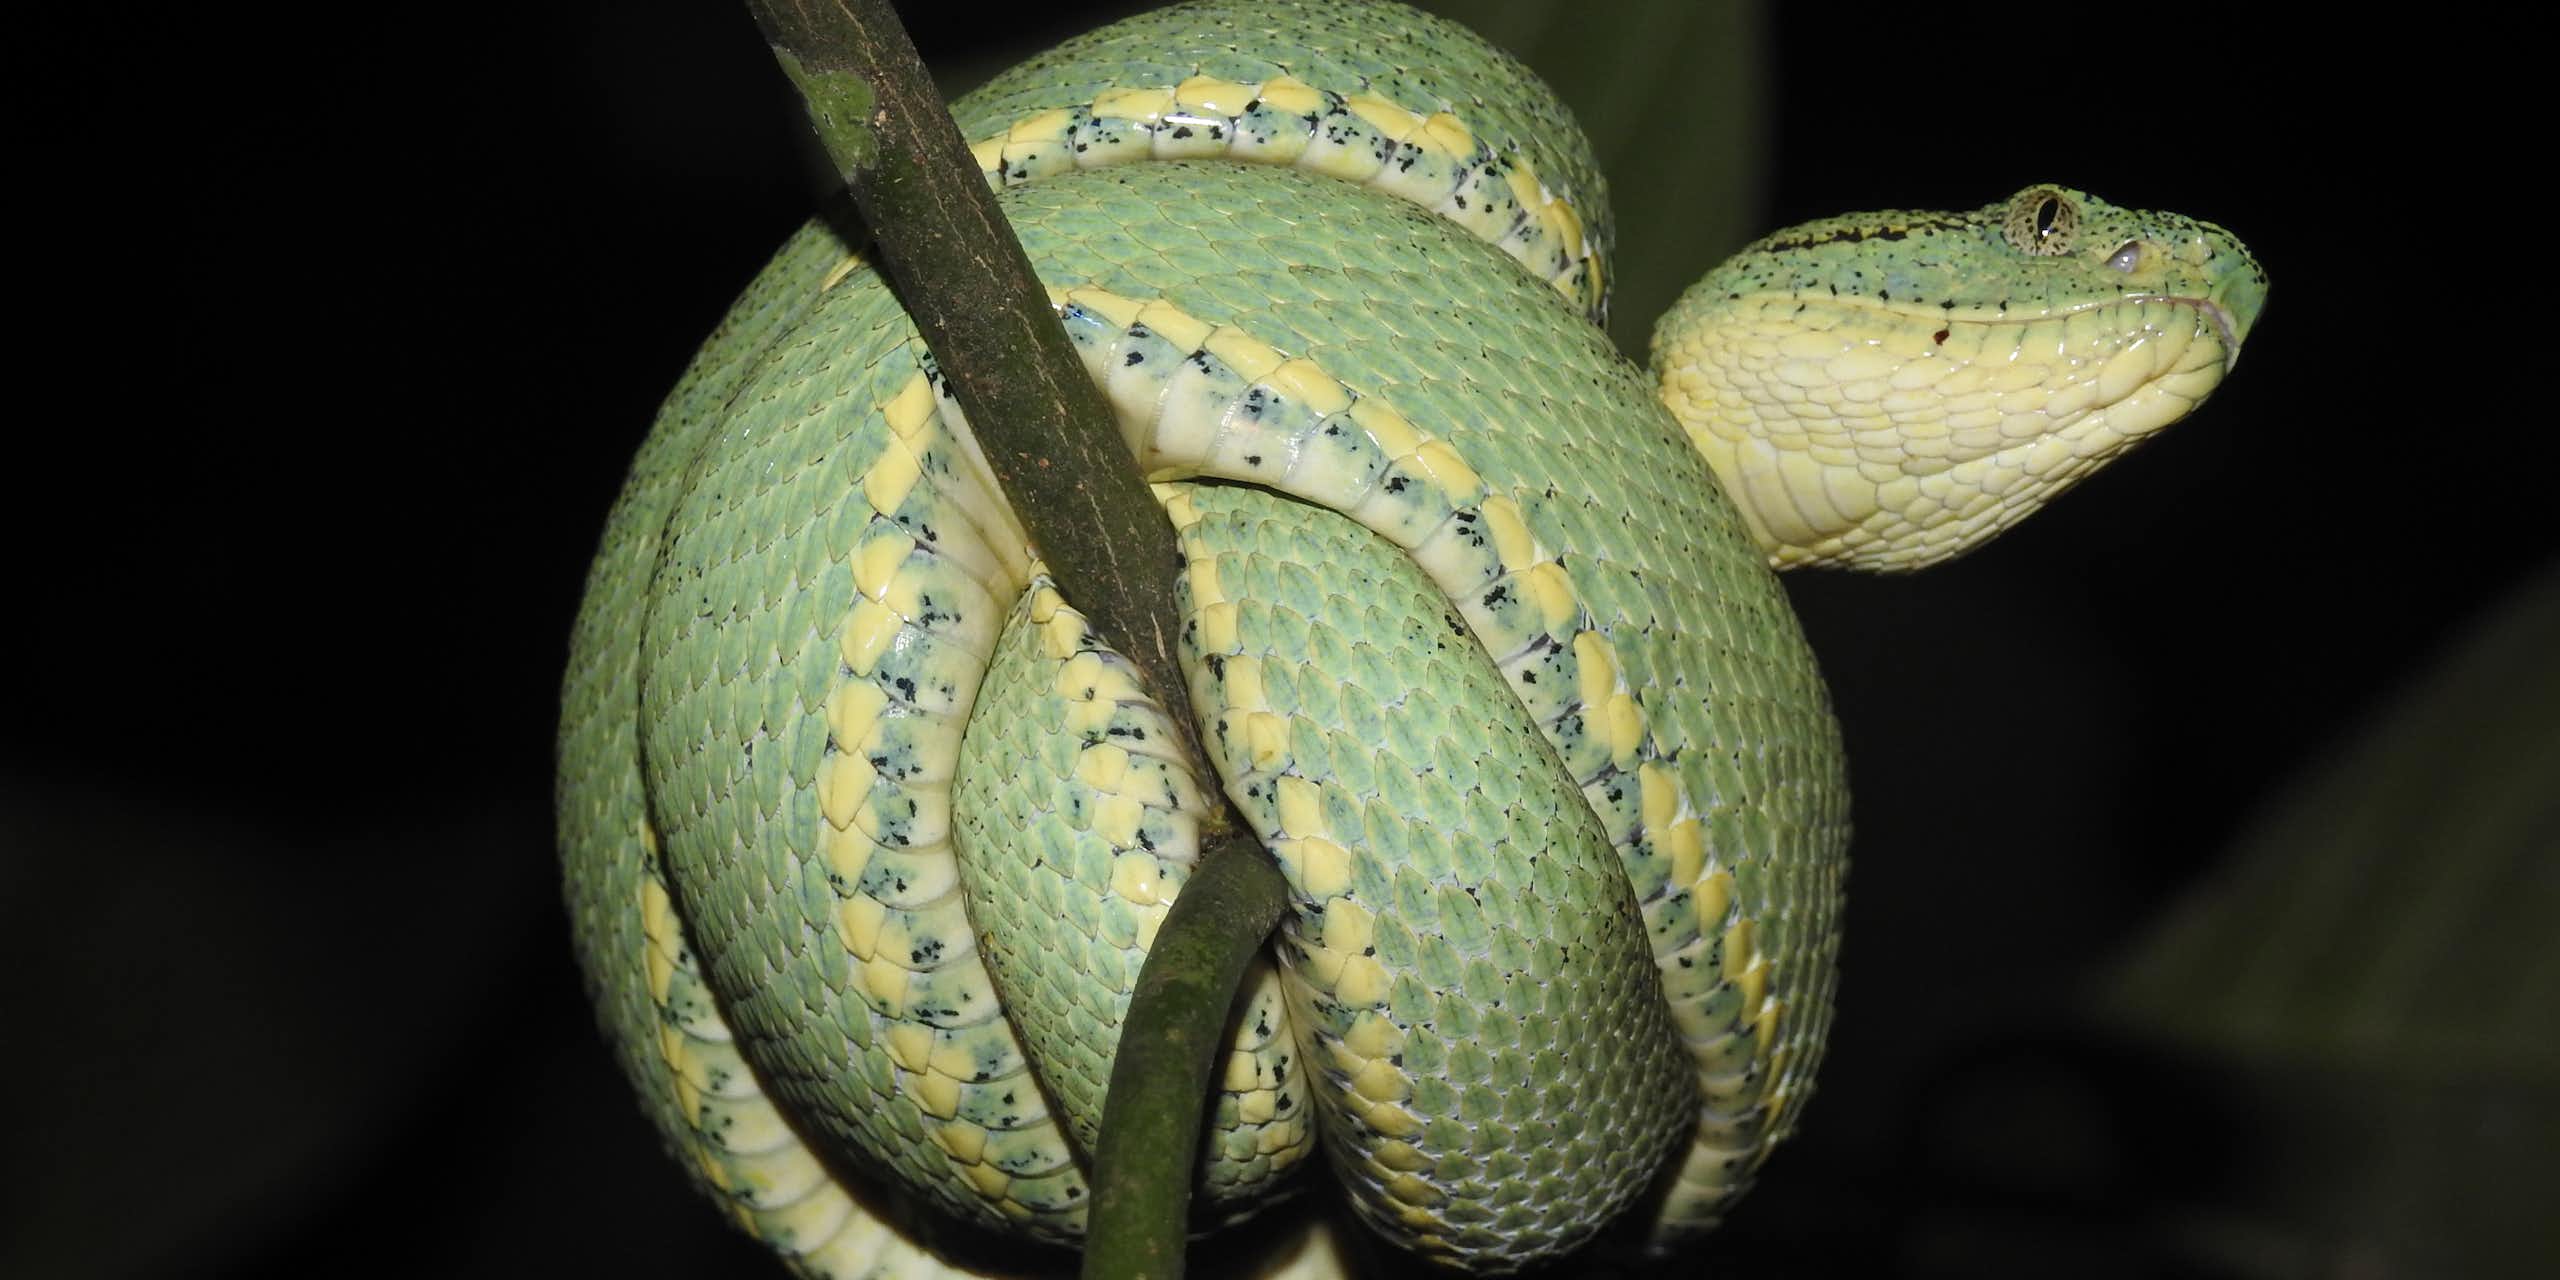 A green snake wrapped around itself on a tree branch